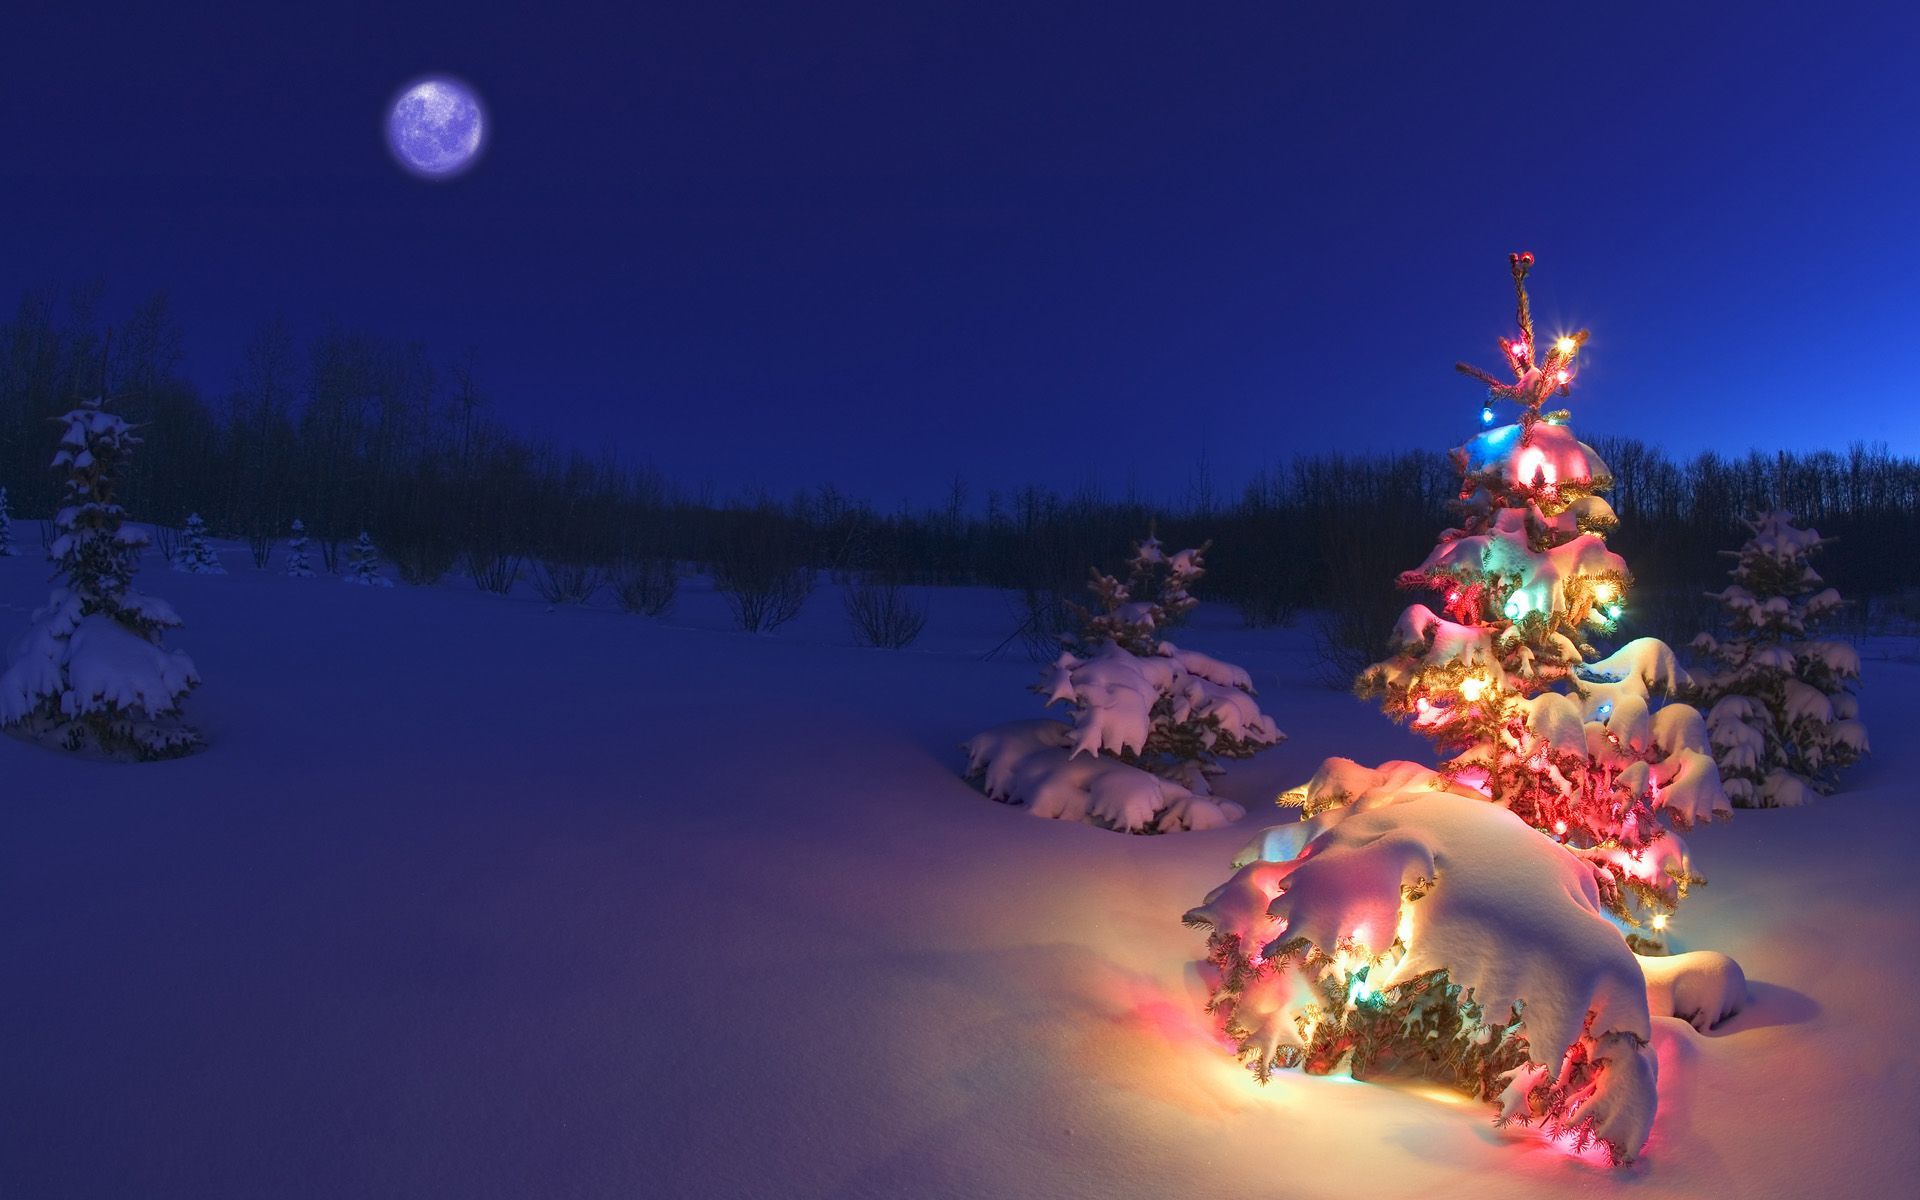 Wallpaper Of A Christmas Tree In Snowy Night | Free Wallpaper World